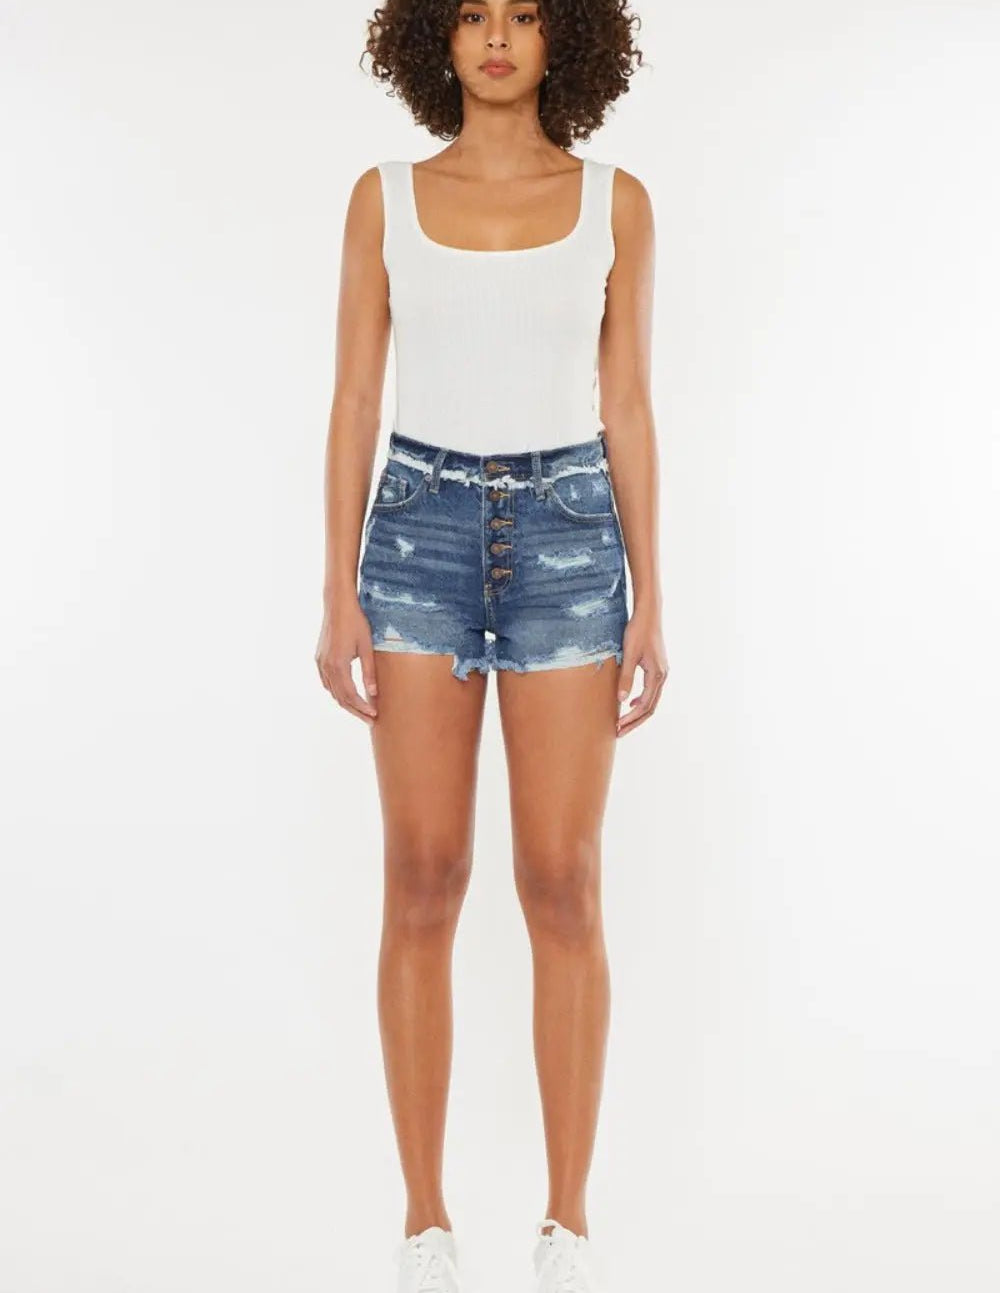 DISTRESSED DENIM BUTTON FLY SHORTS - MeadeuxDISTRESSED DENIM BUTTON FLY SHORTSShortsMeadeux